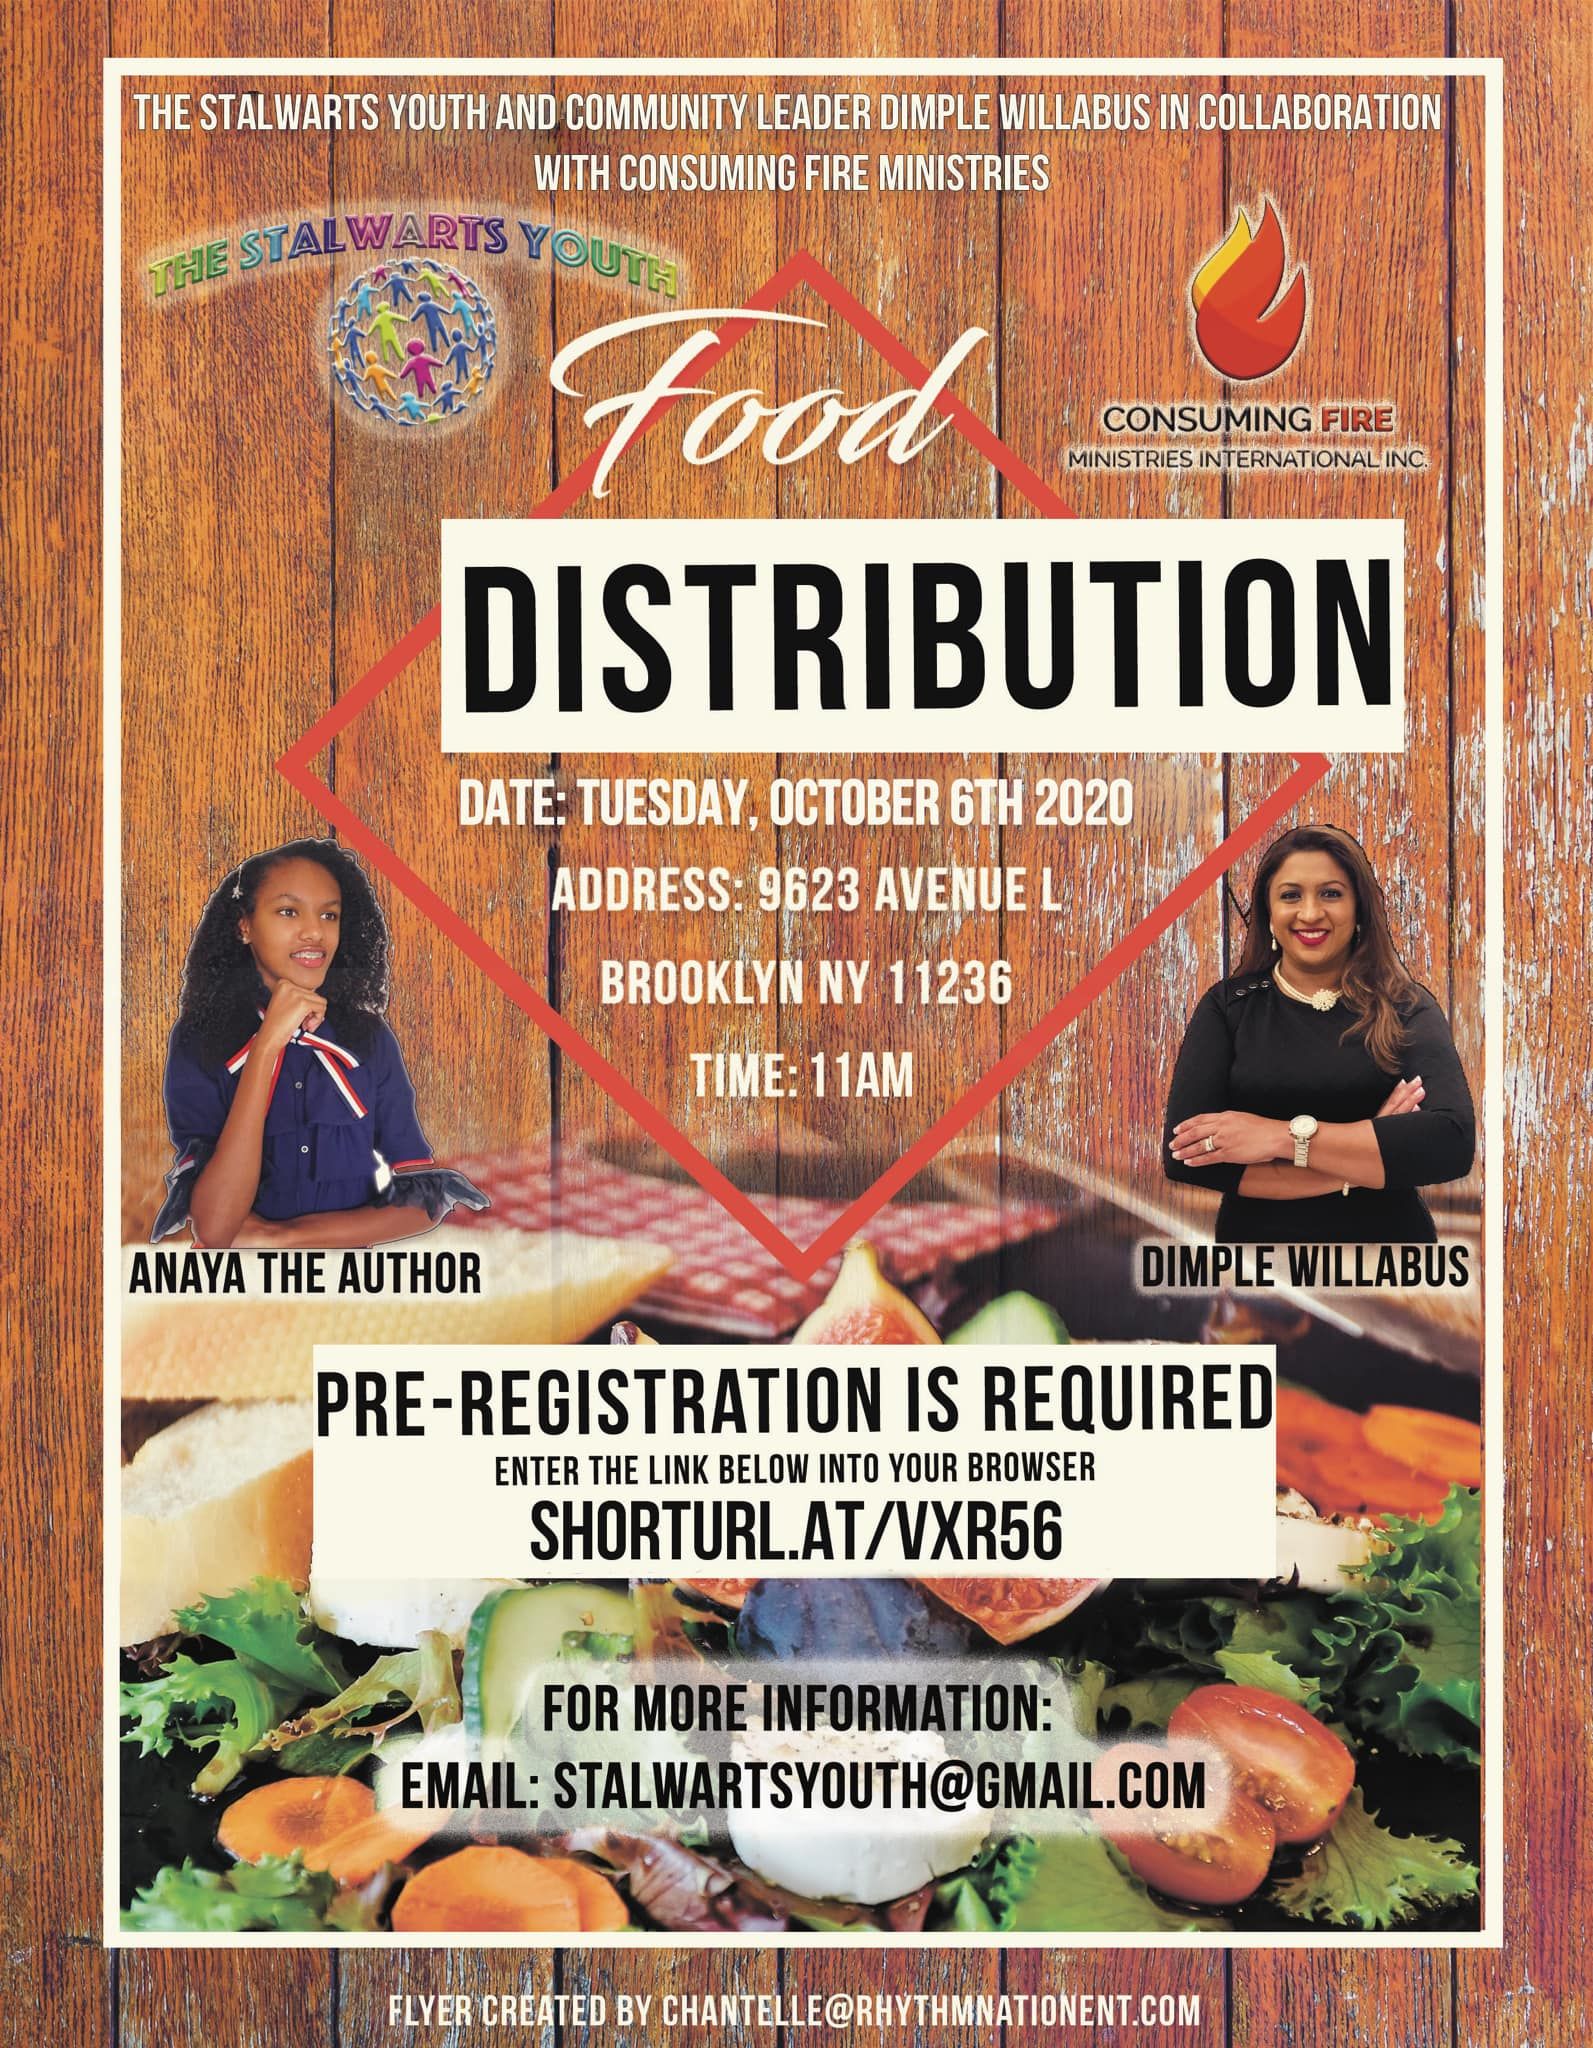 Stalwarts Youth Food Distribution in collaboration with Consuming Fire Ministries in Brooklyn, NY on October 6, 2020